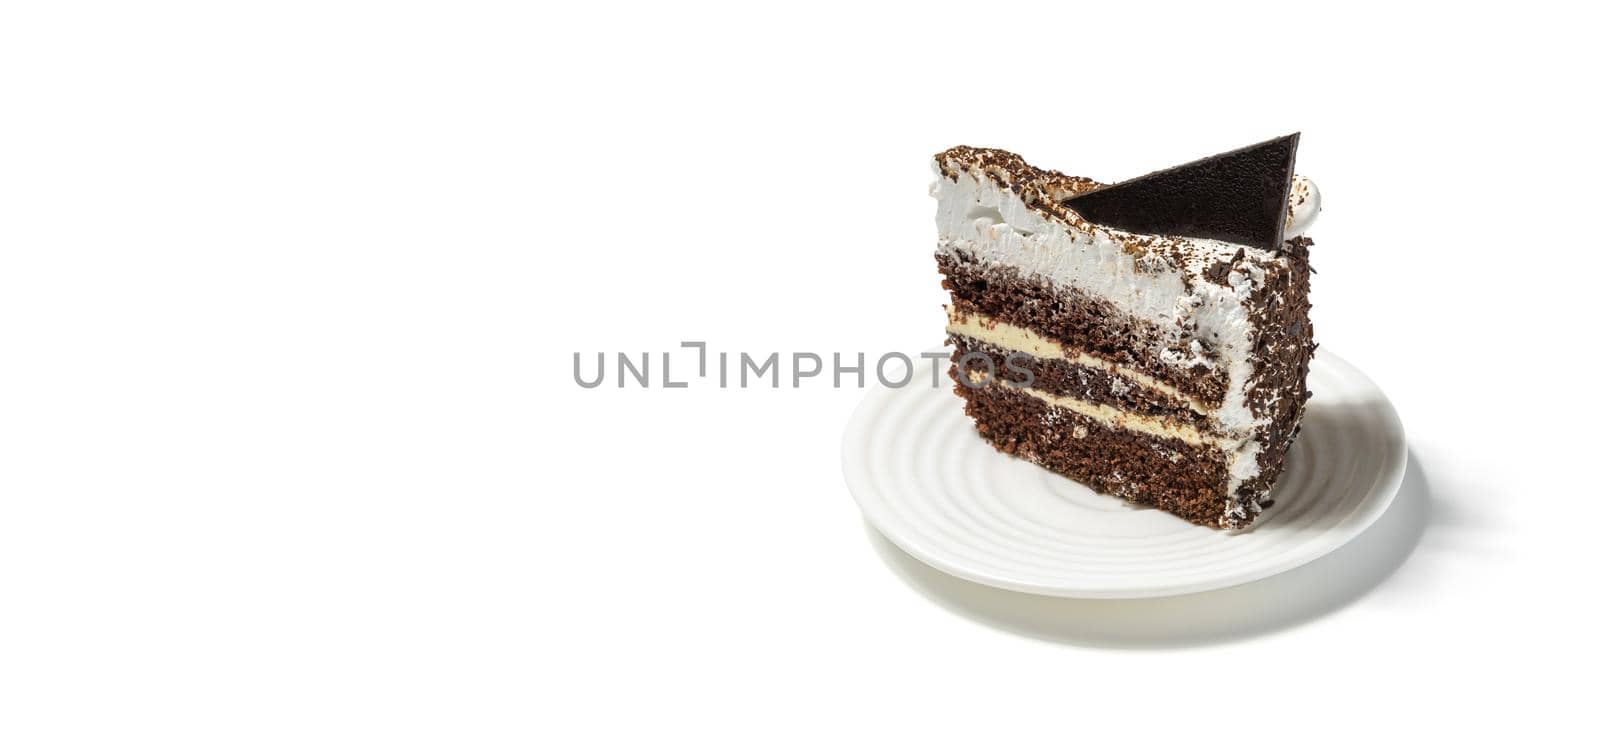 Tasty chocolate cake on a white plate over white background banner format.